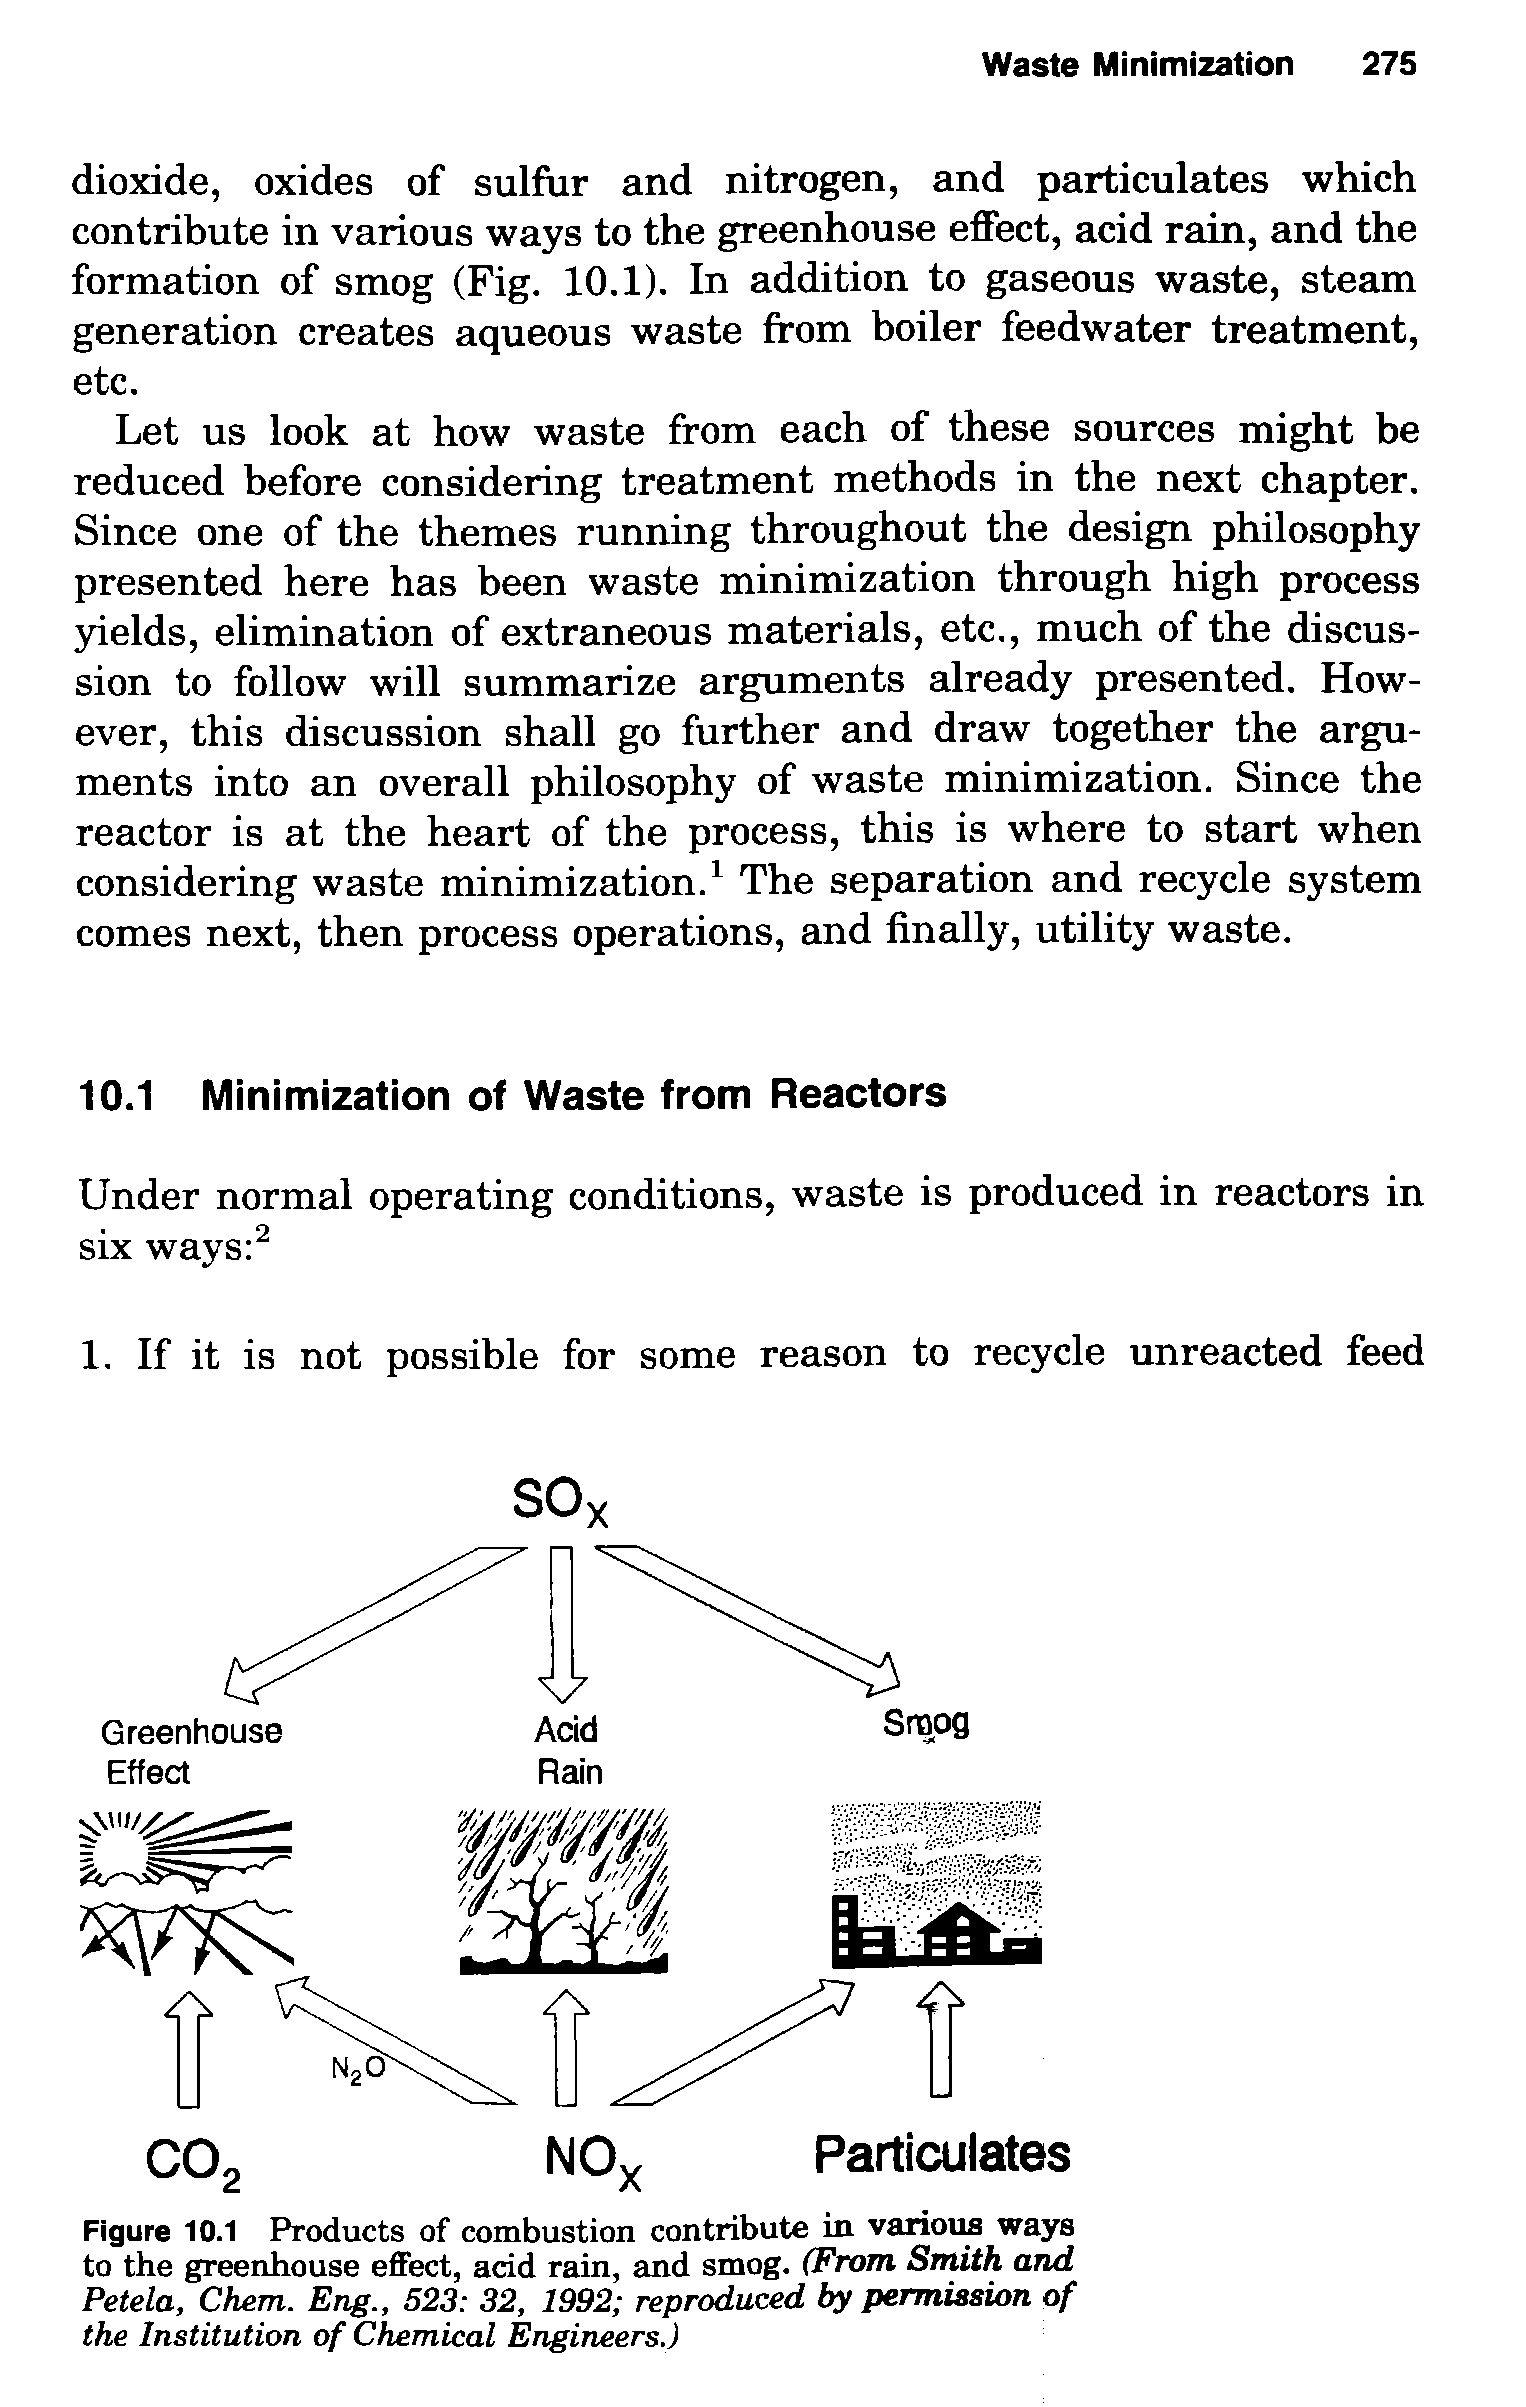 Figure 10.1 Products of combustion contribute in vanous ways to the greenhouse effect, acid rain, and smog. (From Smith and Petela, Chem. Eng., 523 32, 1992 reproduced by permission of the Institution of Chemical Engineers.)...